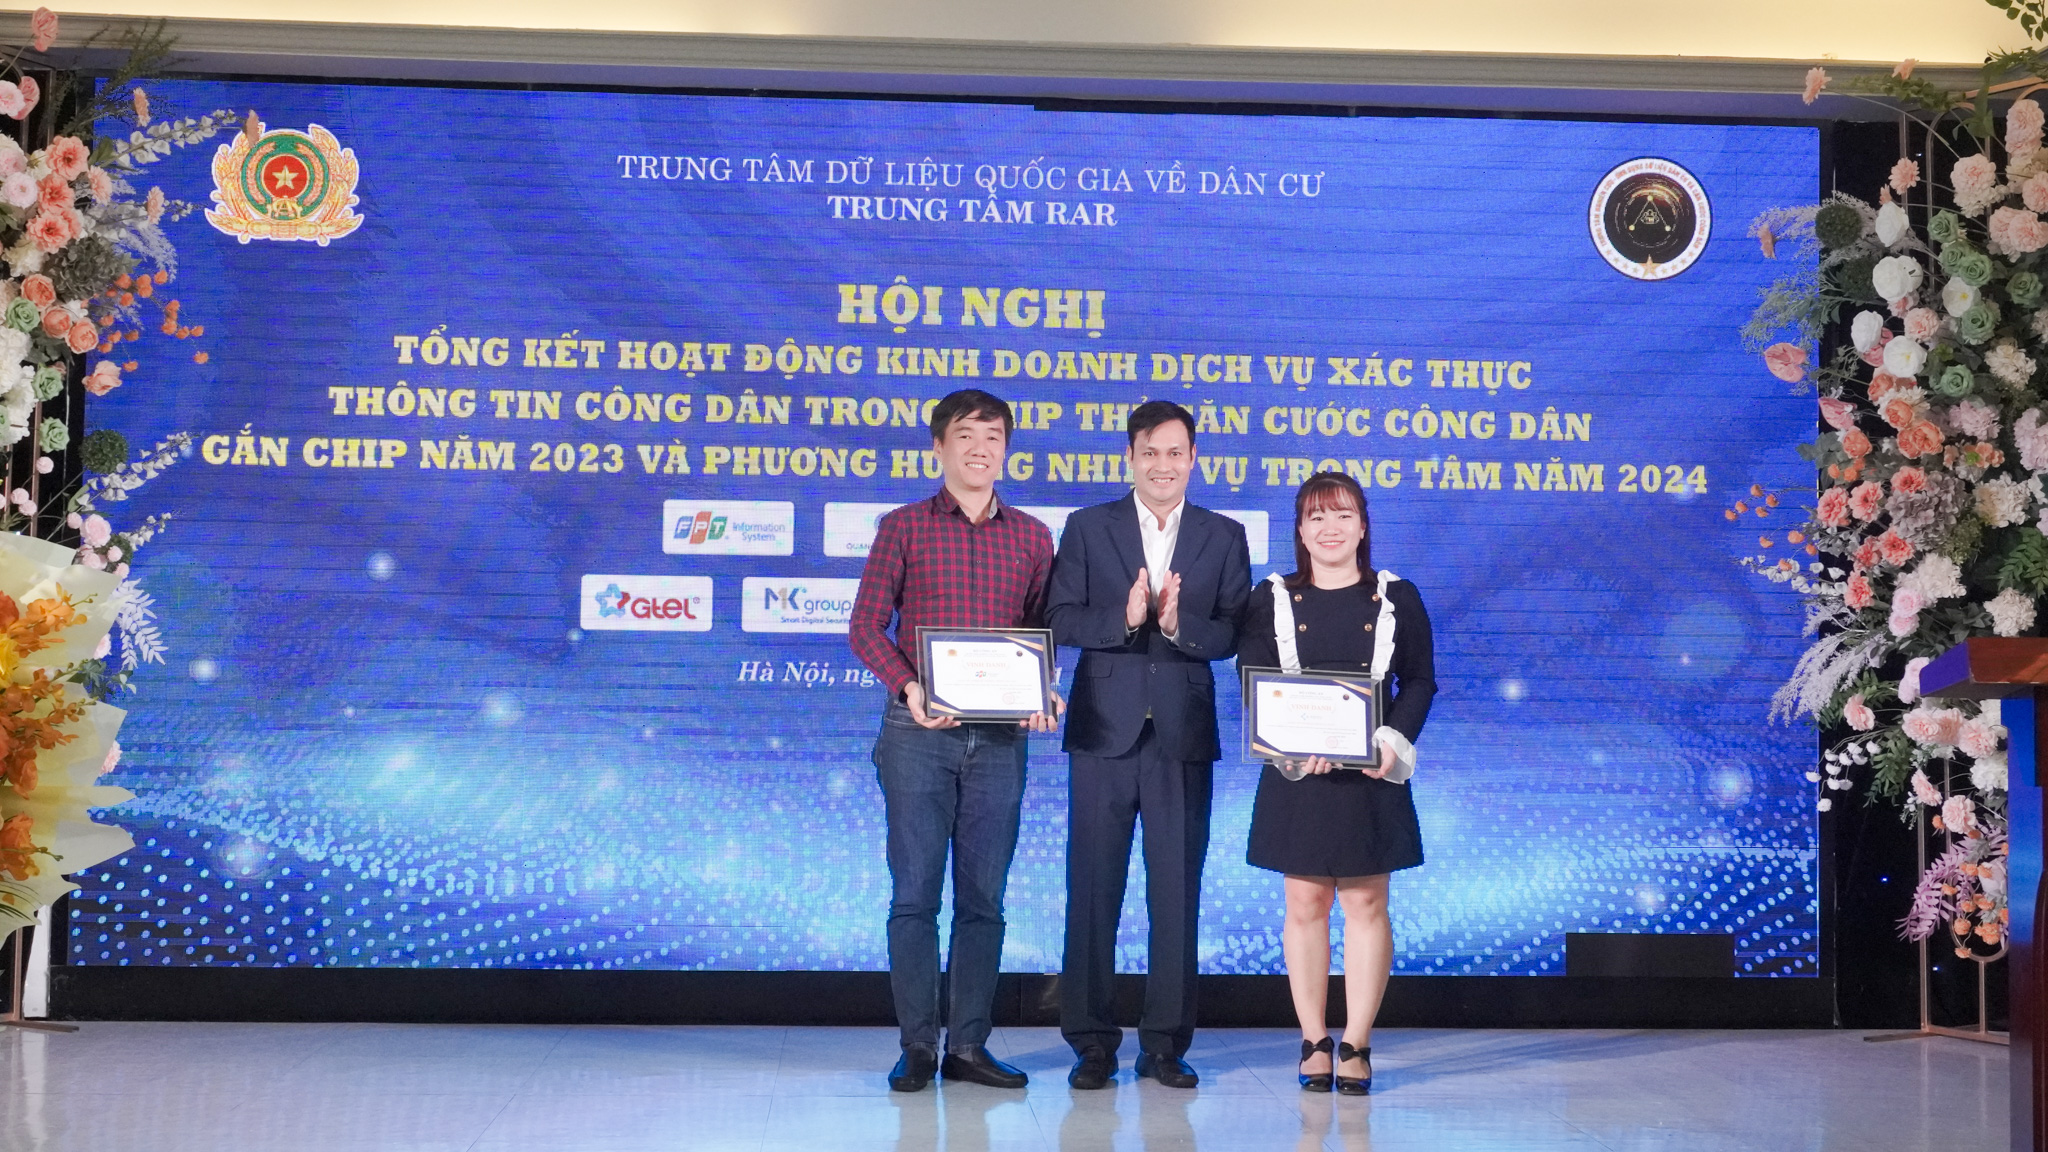 Certificate of Merit from the Vietnam Ministry of Public Security for the achievement of bringing Project 06 into practice – Innovative product and service provider in 2023 category